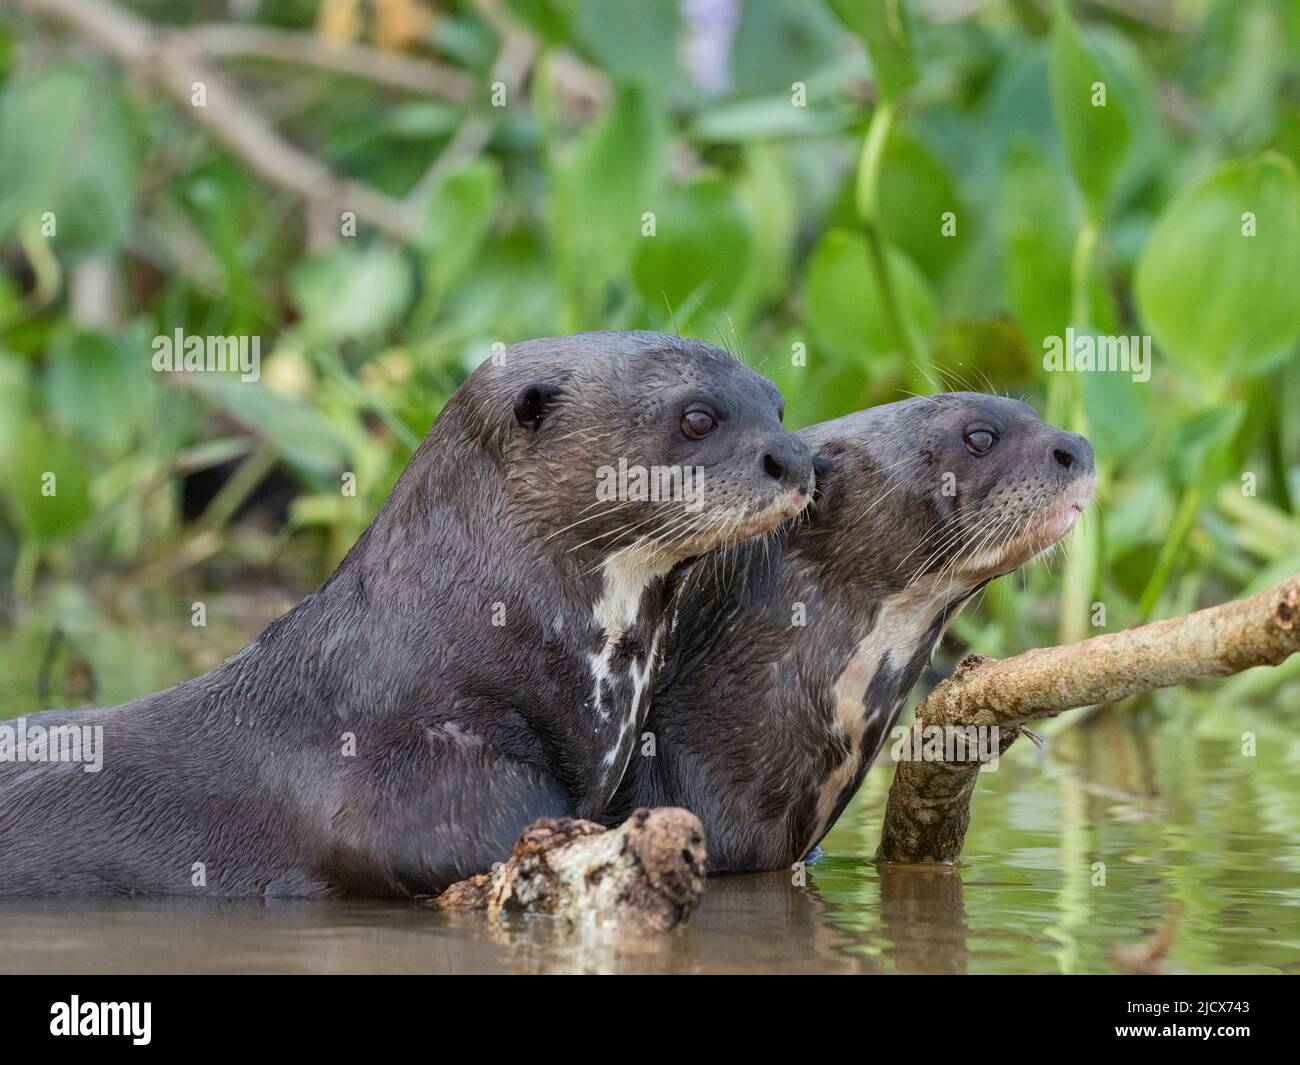 A pair of adult giant river otters (Pteronura brasiliensis), on the Rio Cuiaba, Mato Grosso, Pantanal, Brazil, South America Stock Photo